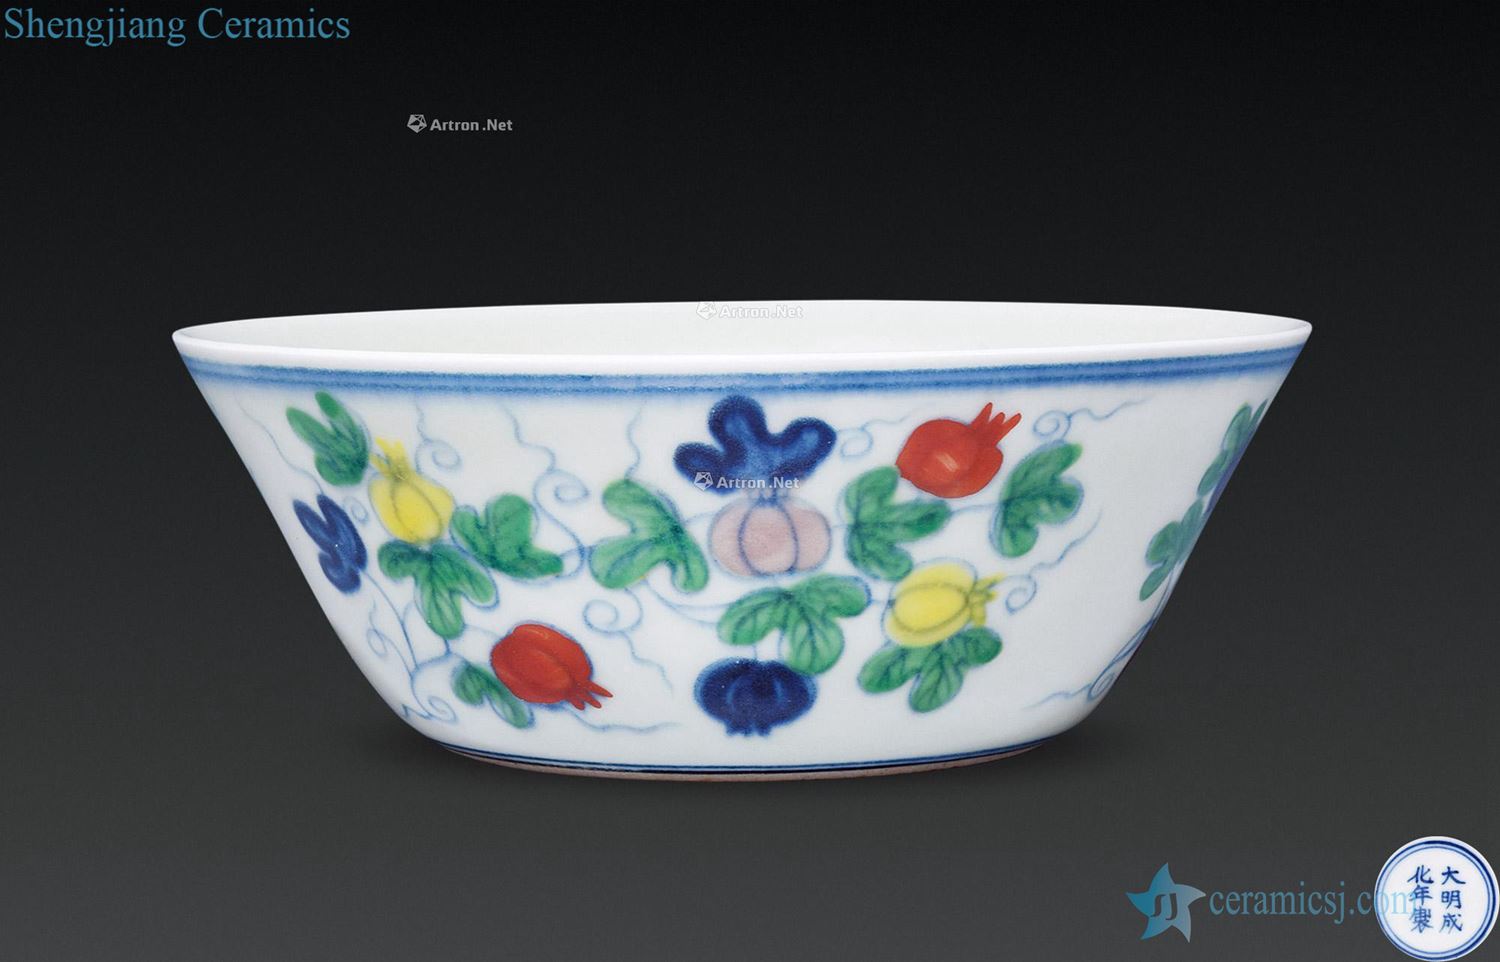 You fight exotic flowers and bright lines lie the foot bowl